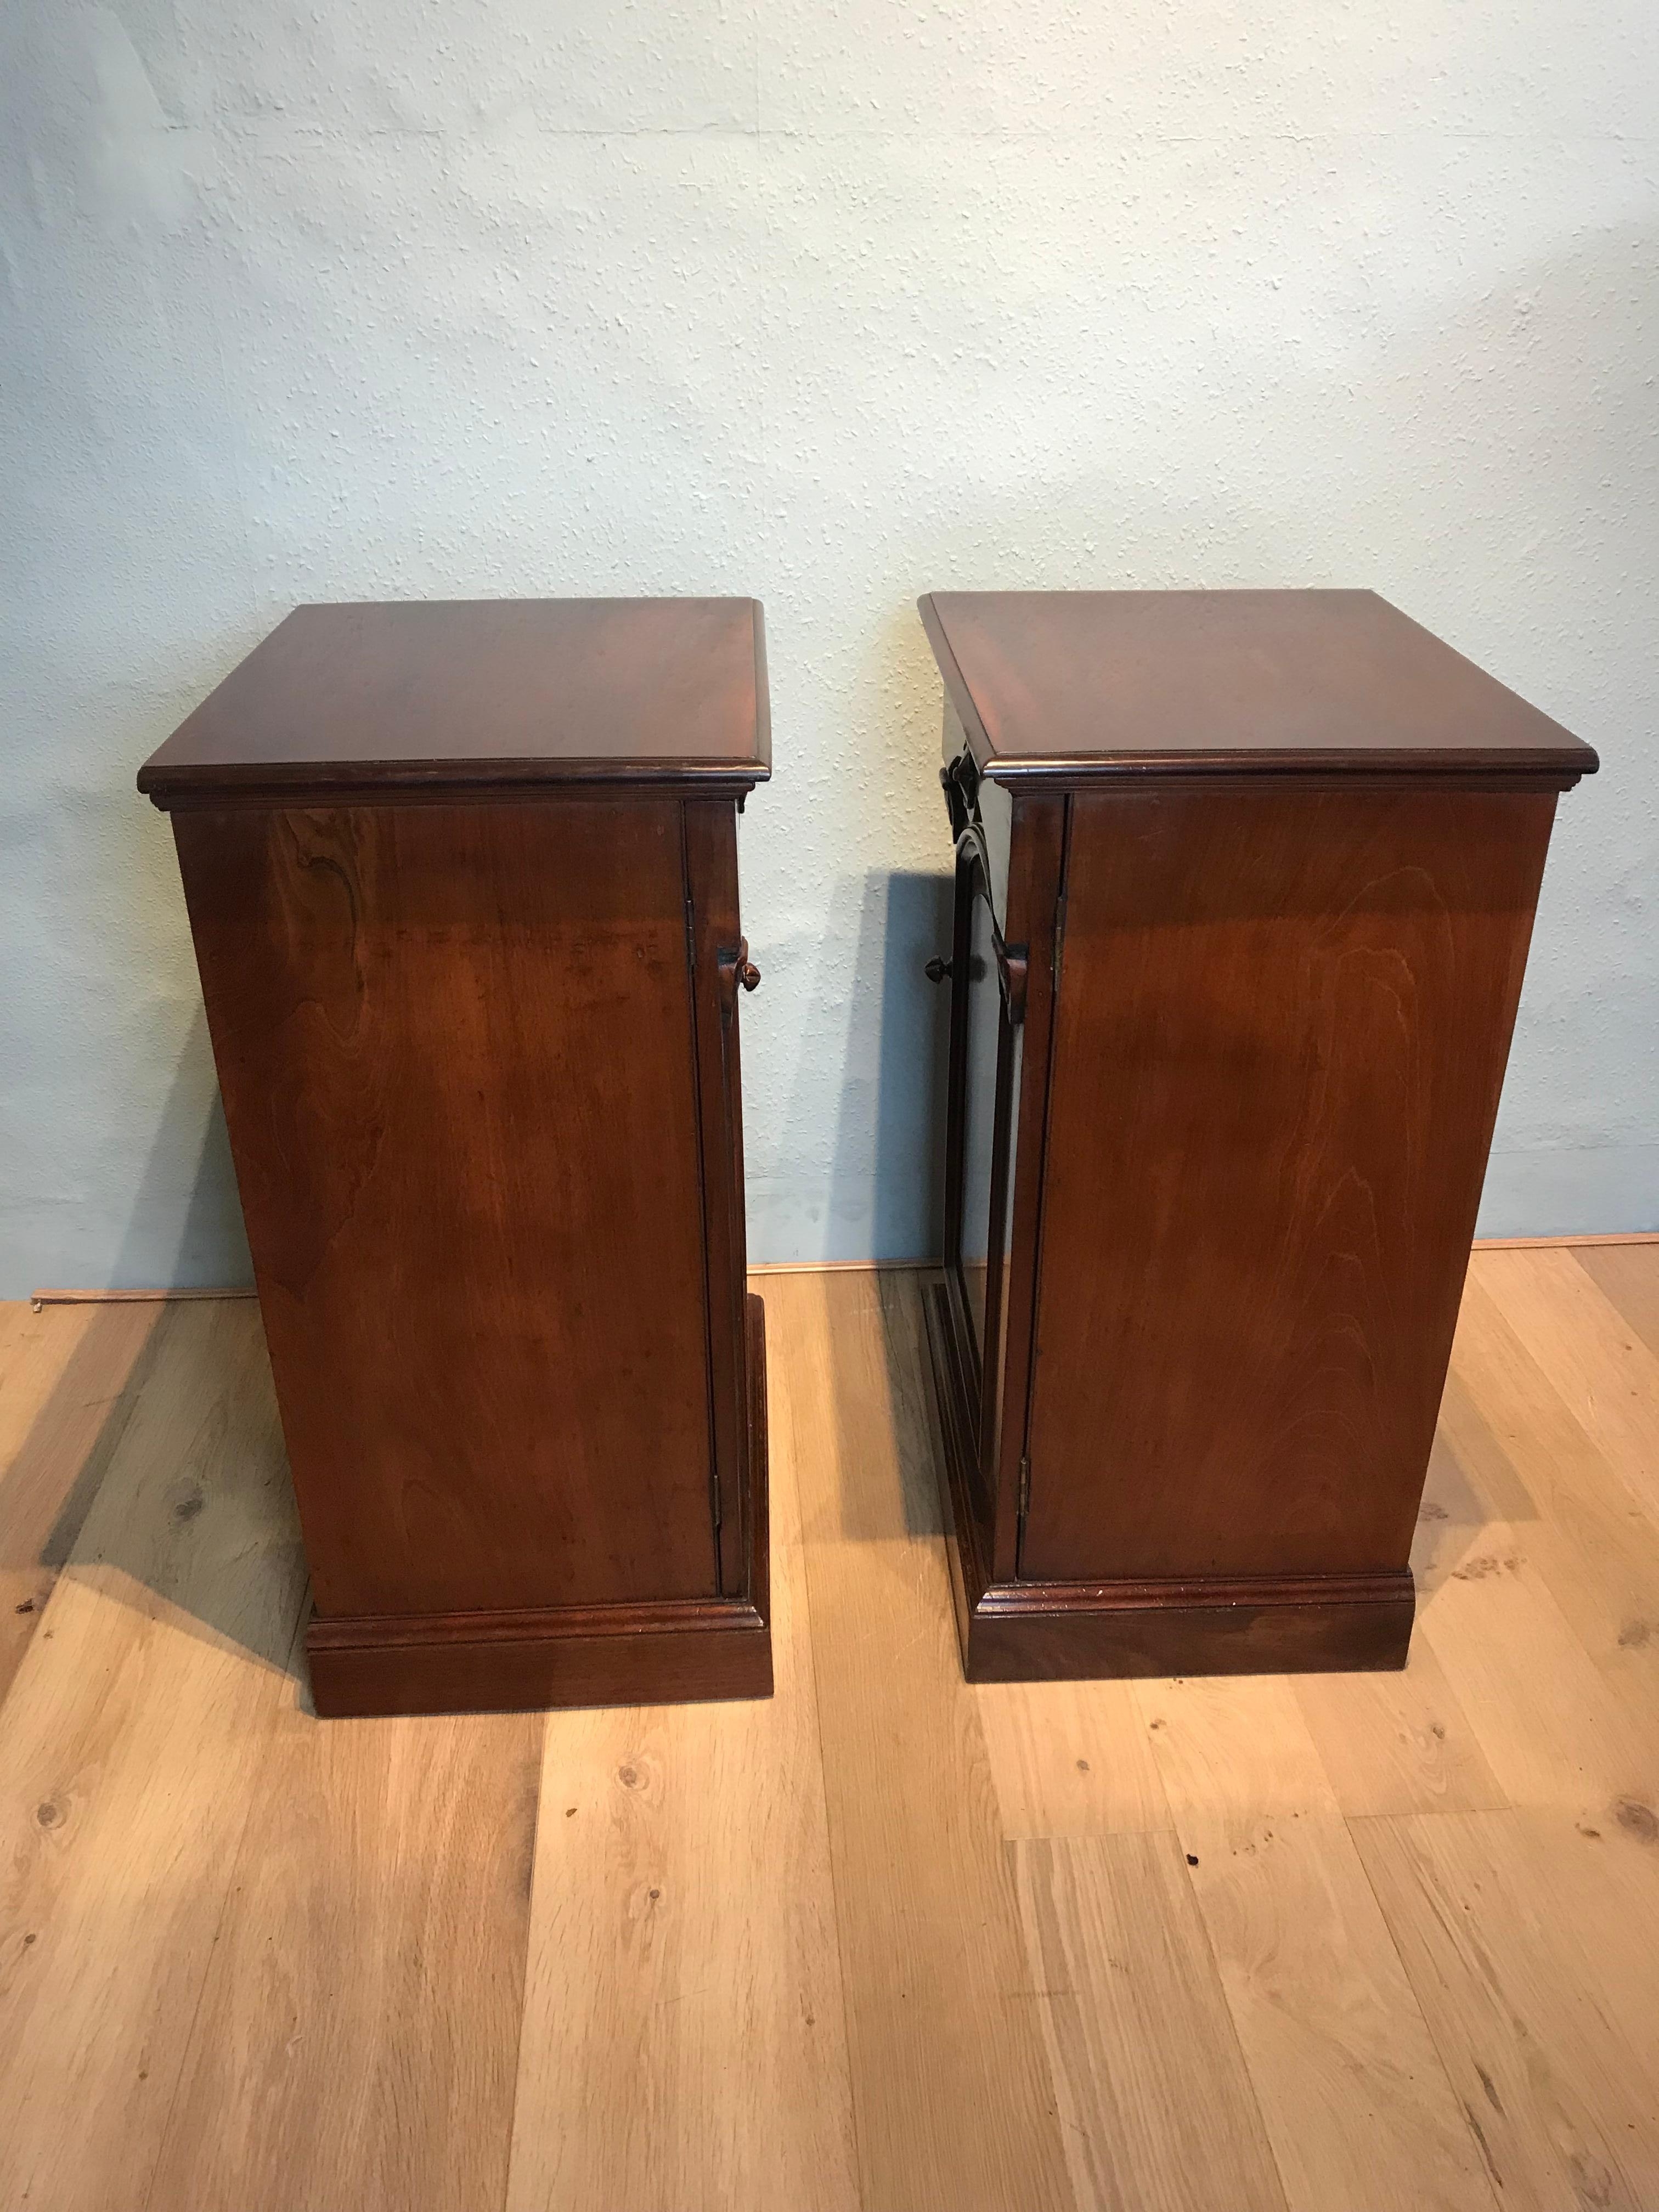 Pair of Pedestal Cabinets In Good Condition For Sale In Sherborne, GB